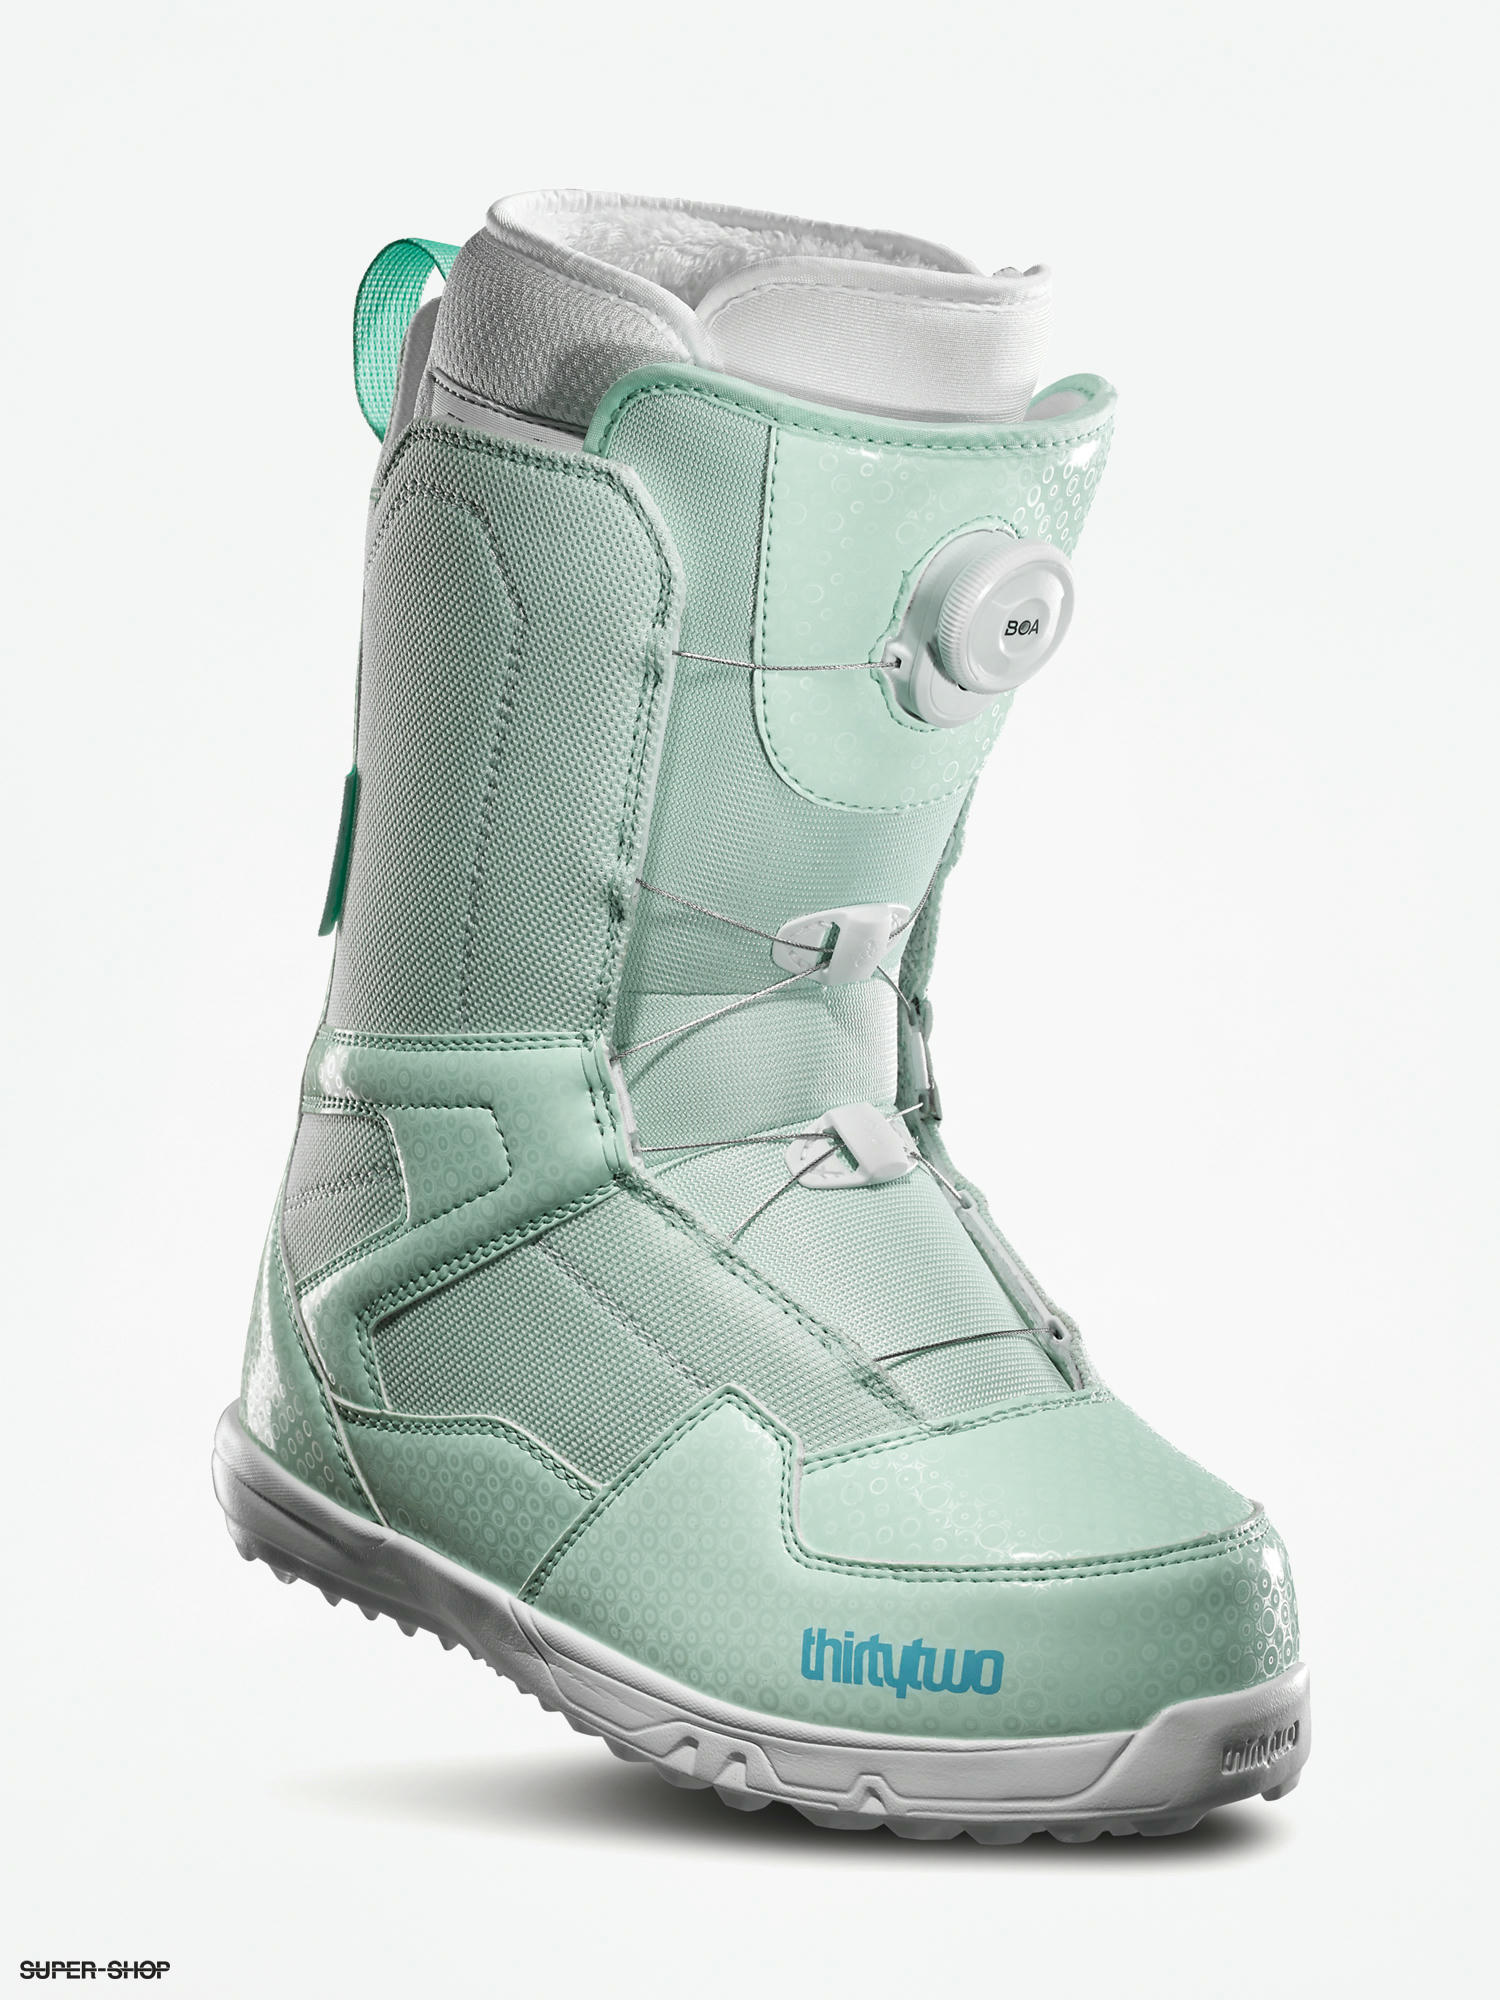 snowboard boots thirtytwo